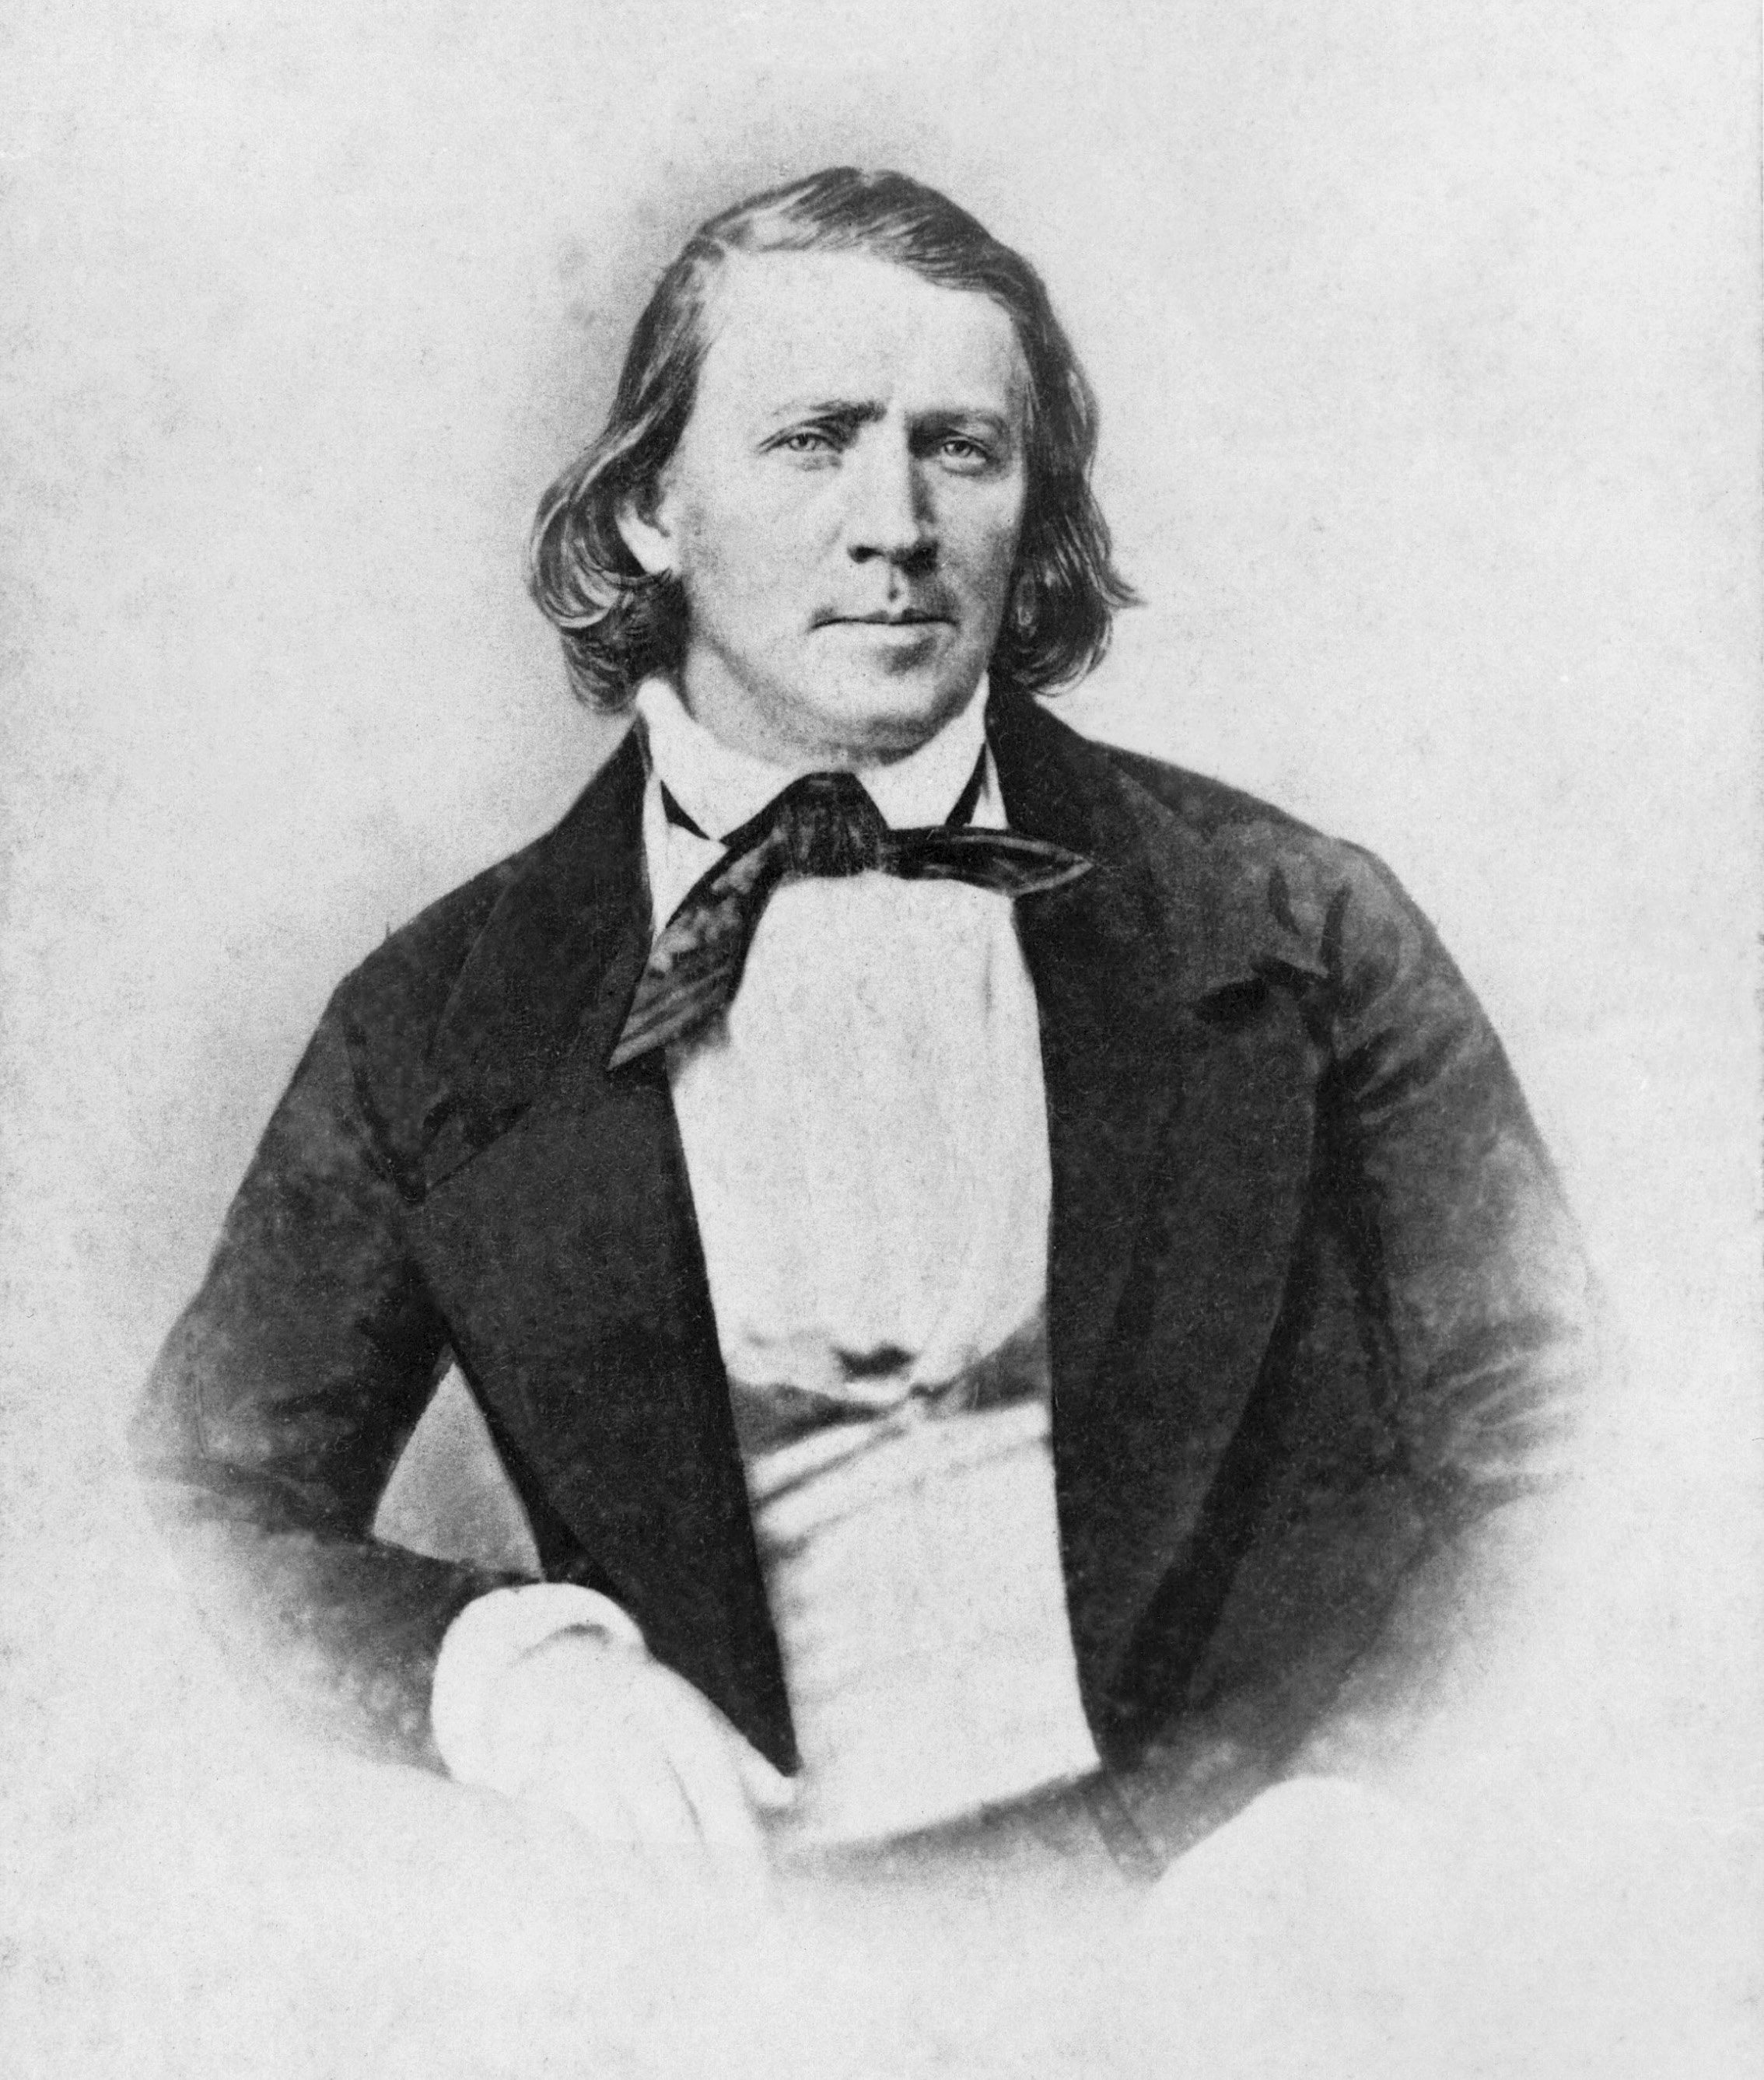 Portrait of a Young Brigham Young